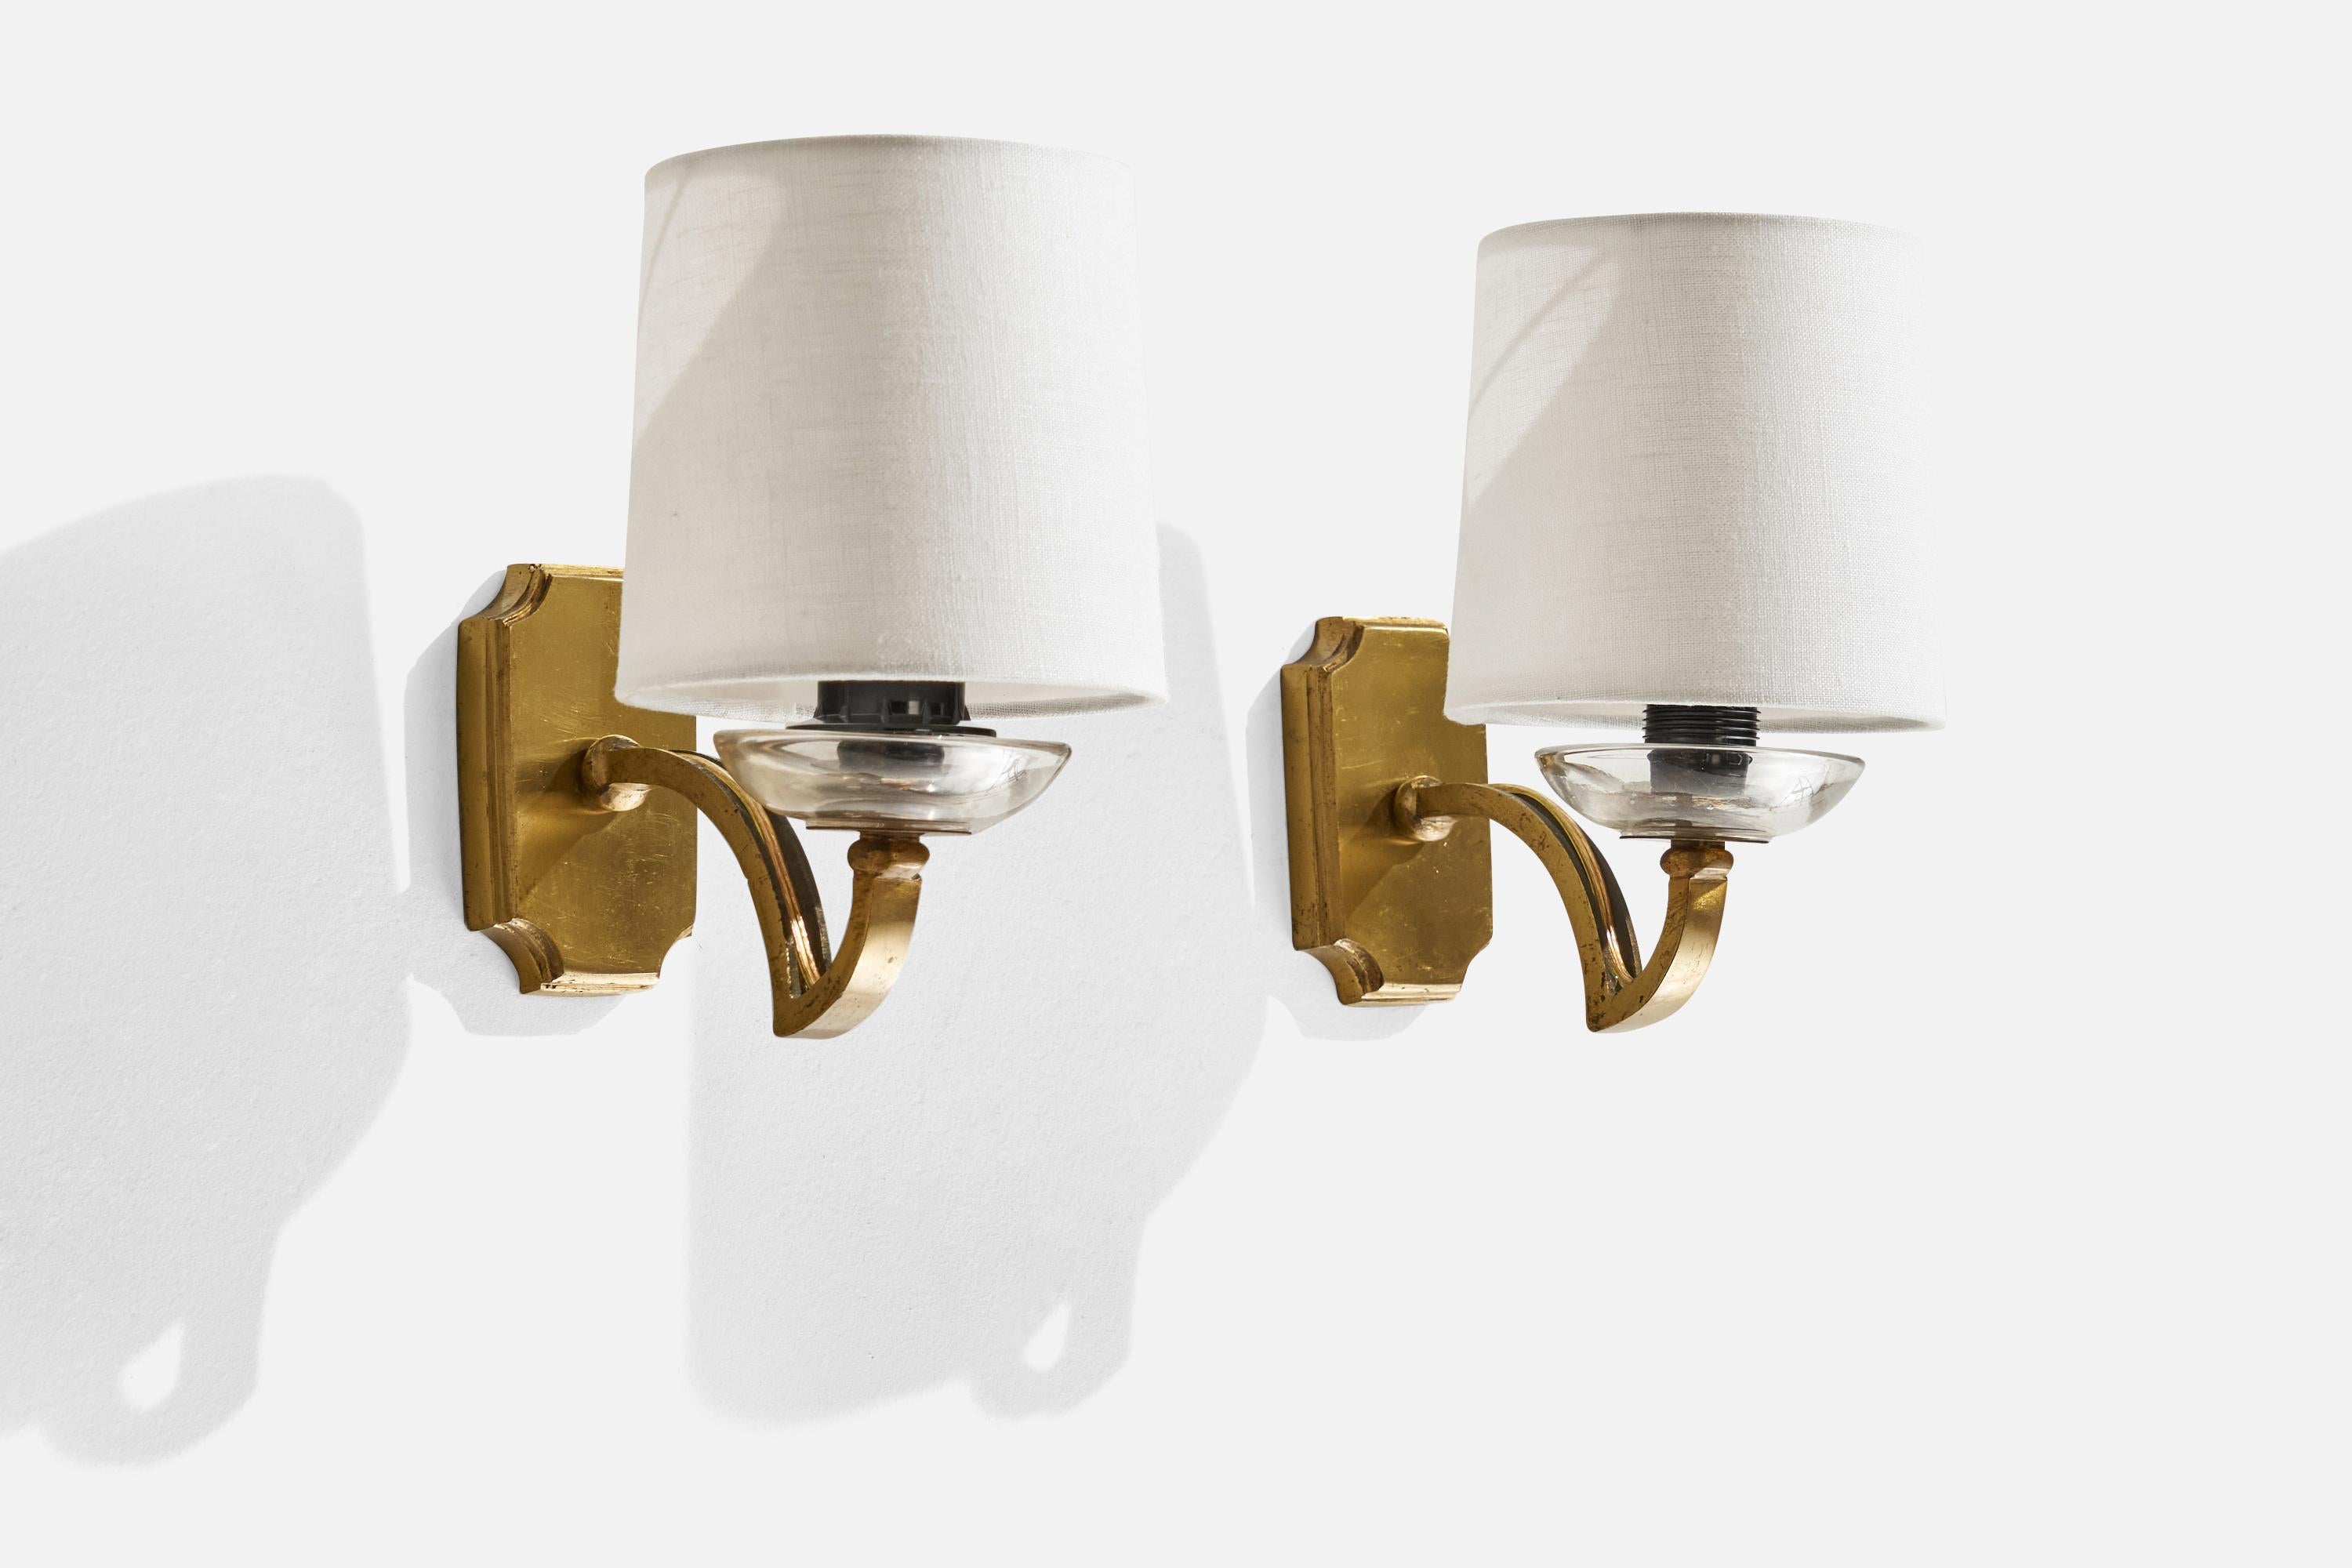 A pair of brass, glass and white fabric wall lights designed and produced in Italy, 1950s.

Overall Dimensions (inches): 7.259” H x 4.55” W x 6” D
Back Plate Dimensions (inches): 3.81” H x 2.28” W x 0.62” D
Bulb Specifications: E-12 Bulb
Number of